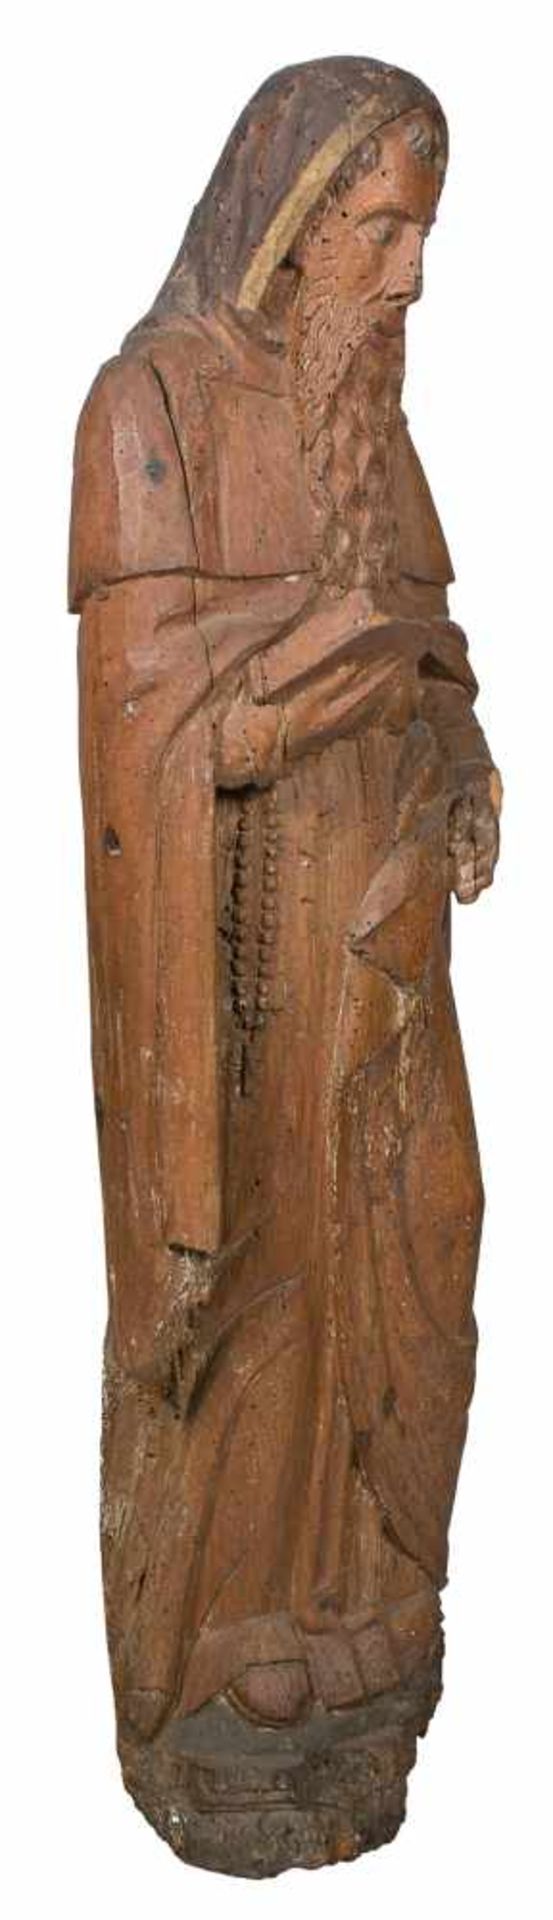 Saint Anthony Carved wooden sculpture. Early 16th century.Saint Anthony Carved wooden sculpture. - Bild 4 aus 5